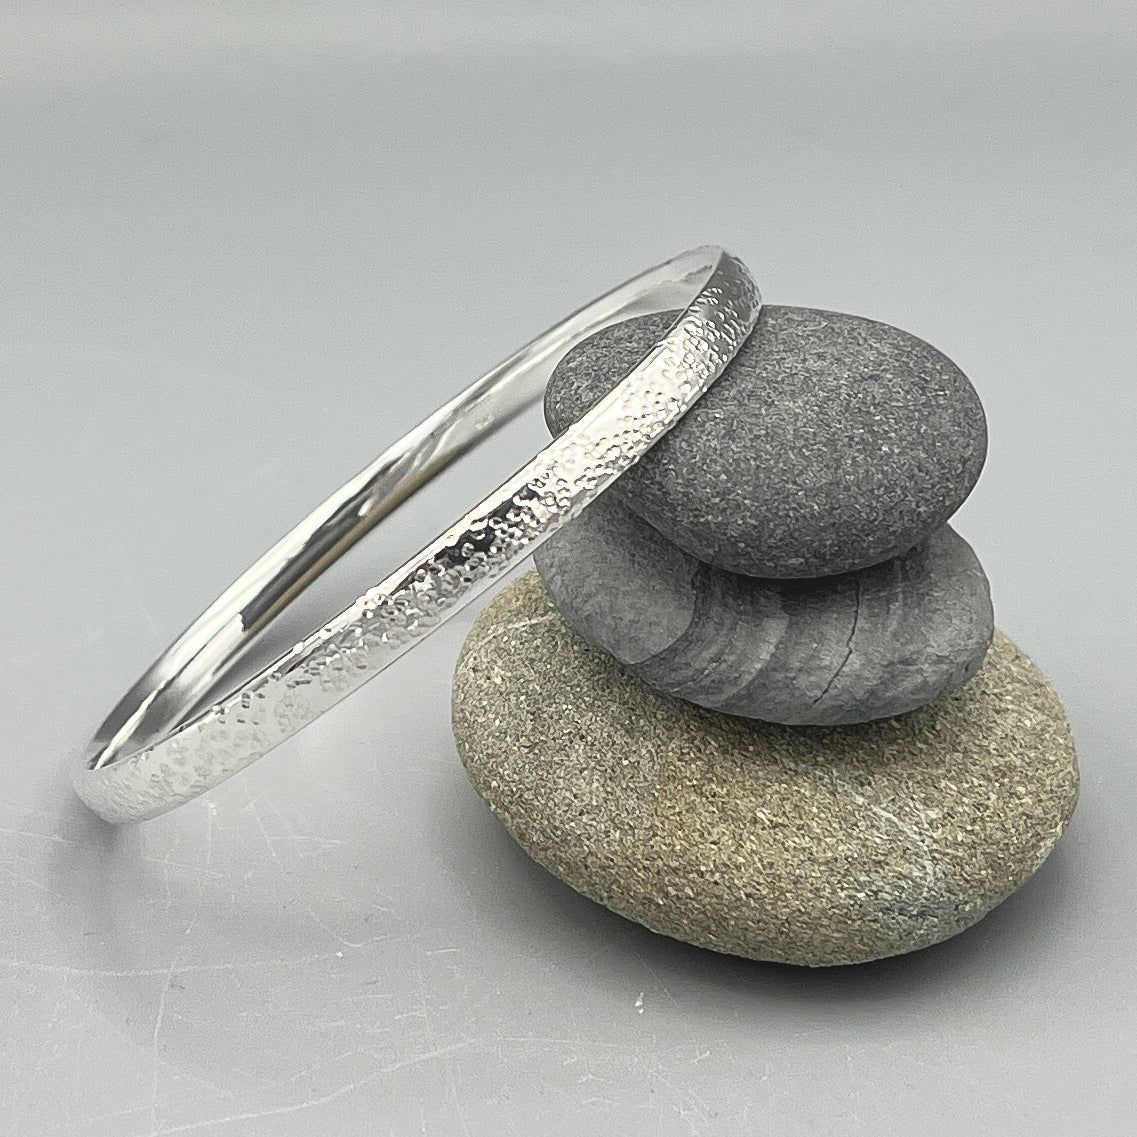 Sterling Silver Bangle. 'Star hammered' finish 70mm x 5.4mm x 2.3mm